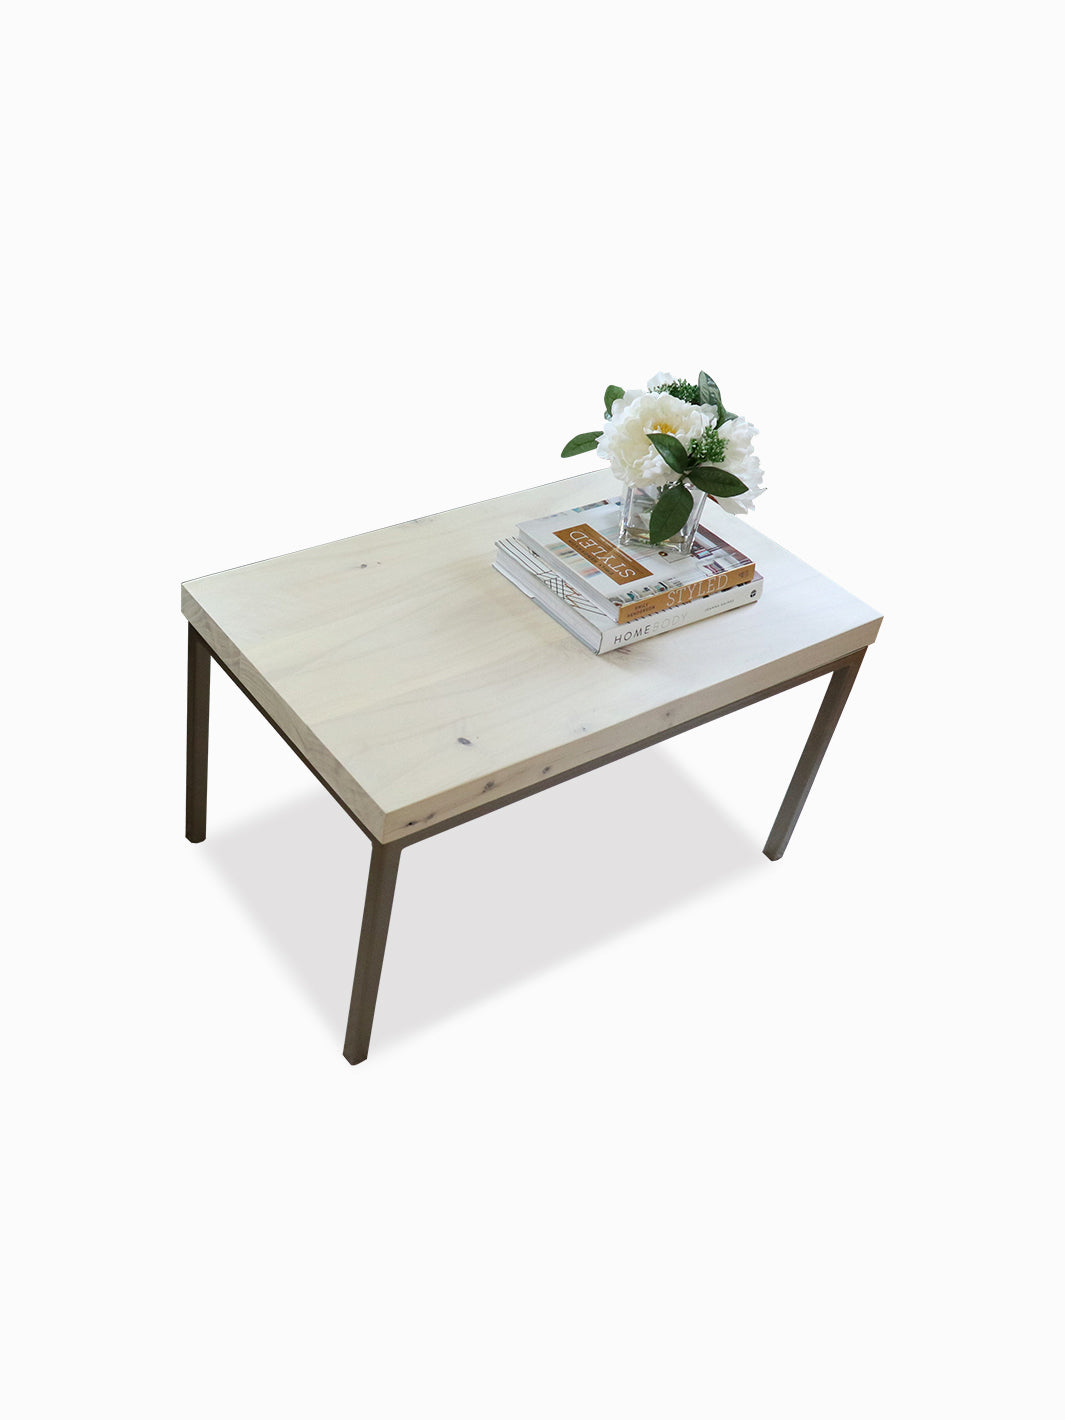 Modern White Maple Coffee Table with Gold Metal Base SHOWROOM (in stock) Earthly Comfort Coffee Tables 2042